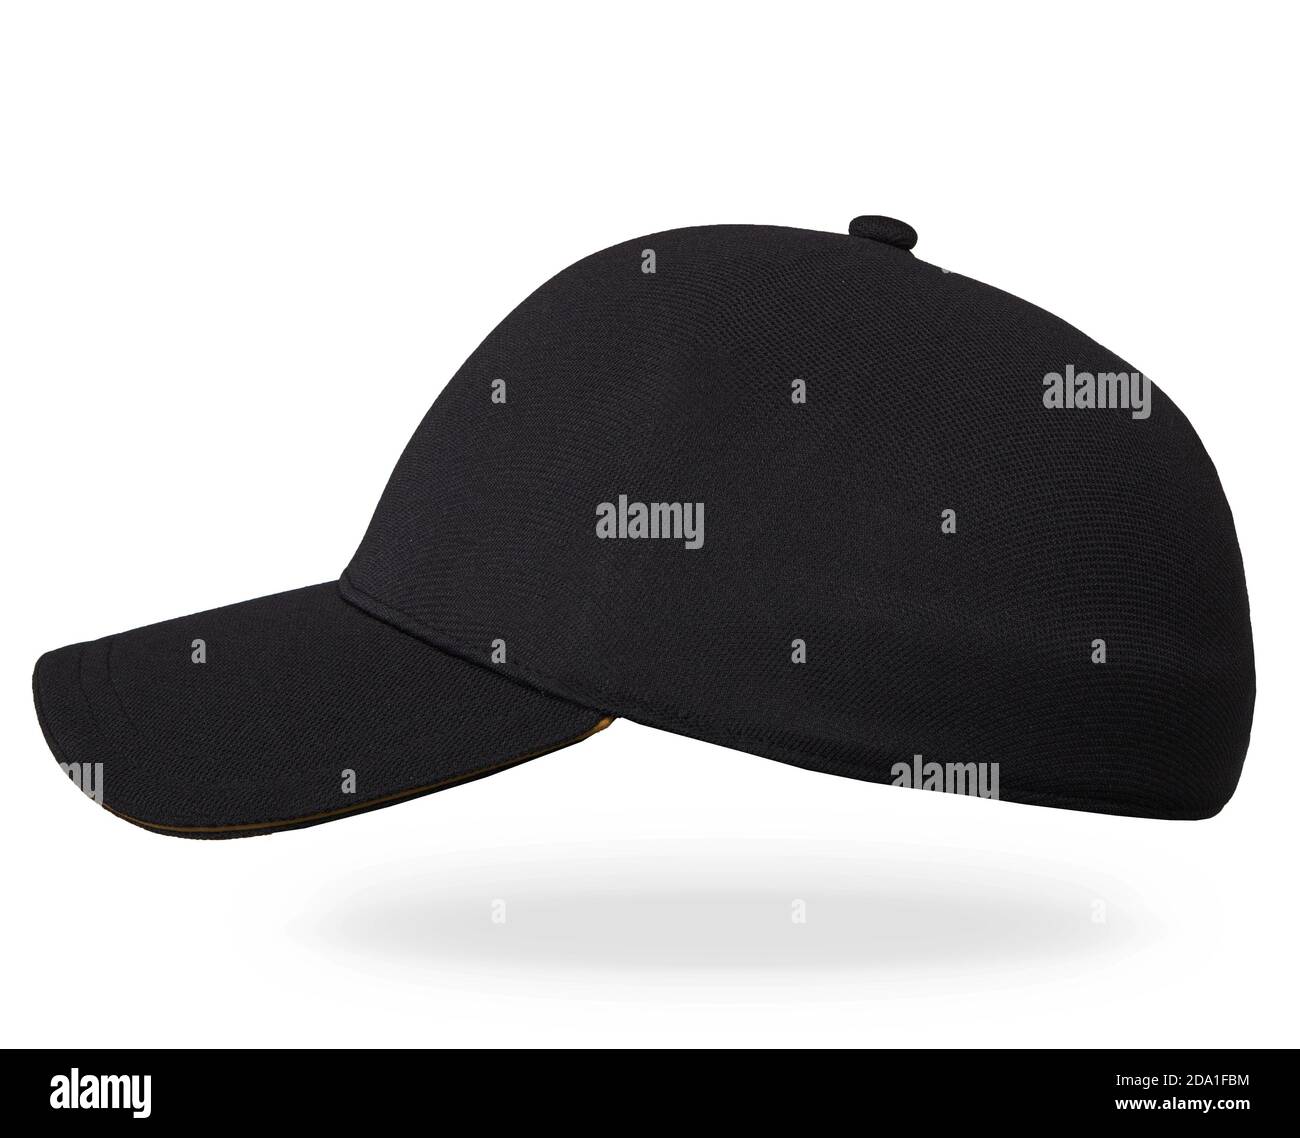 Blank black and white baseball cap mockup set, profile side view. Black baseball cap isolated on white background with clipping path. Stock Photo